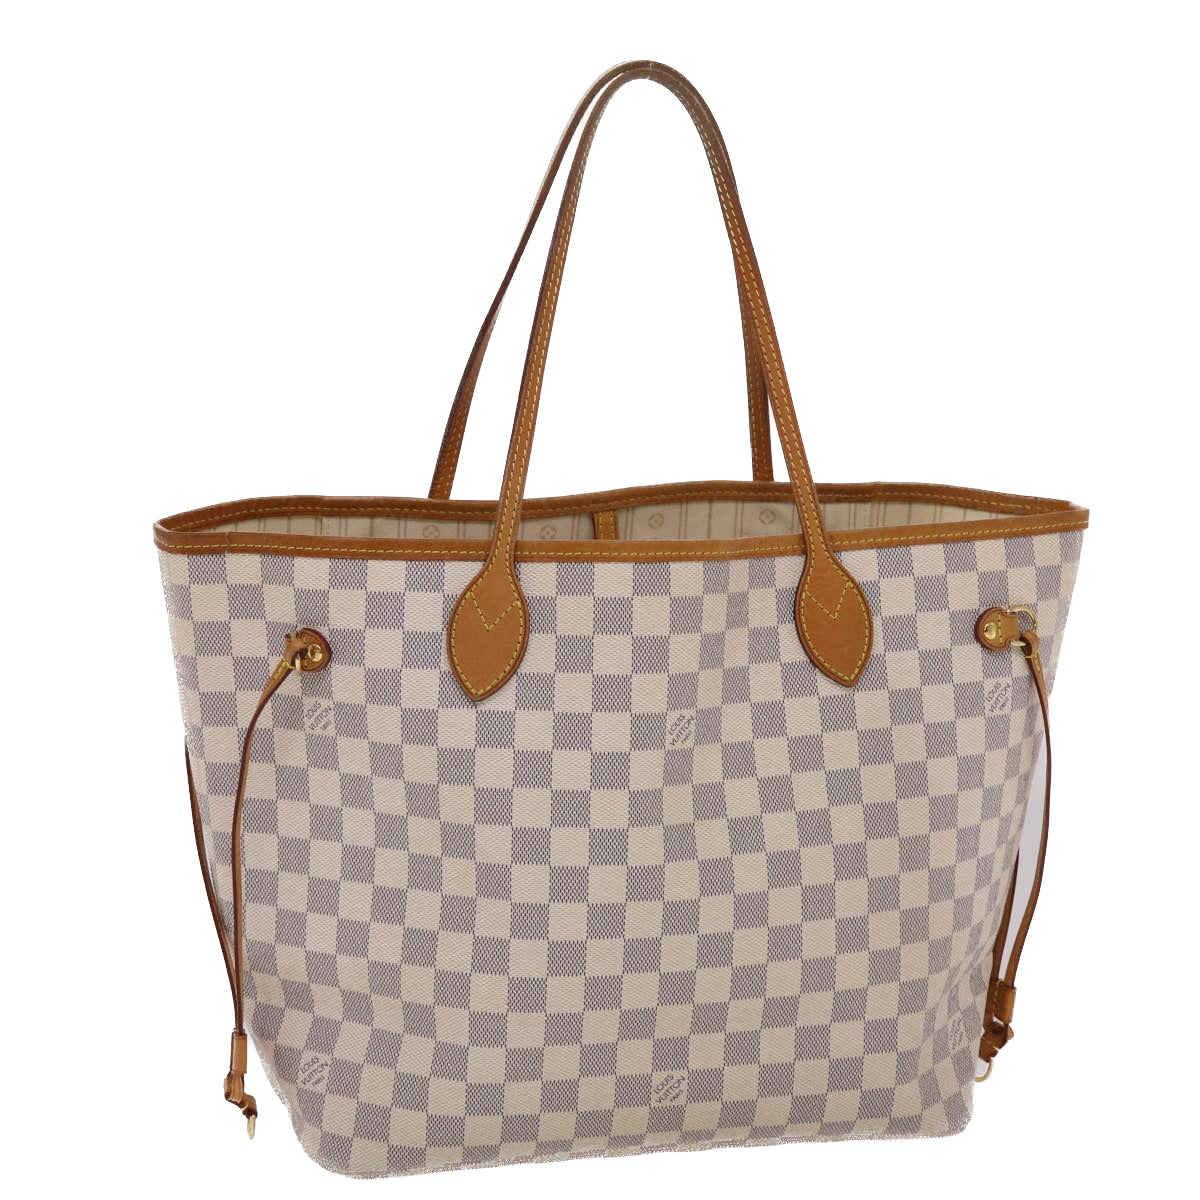 Louis+Vuitton+Neverfull+Tote+MM+Black+Canvas%2FLeather for sale online